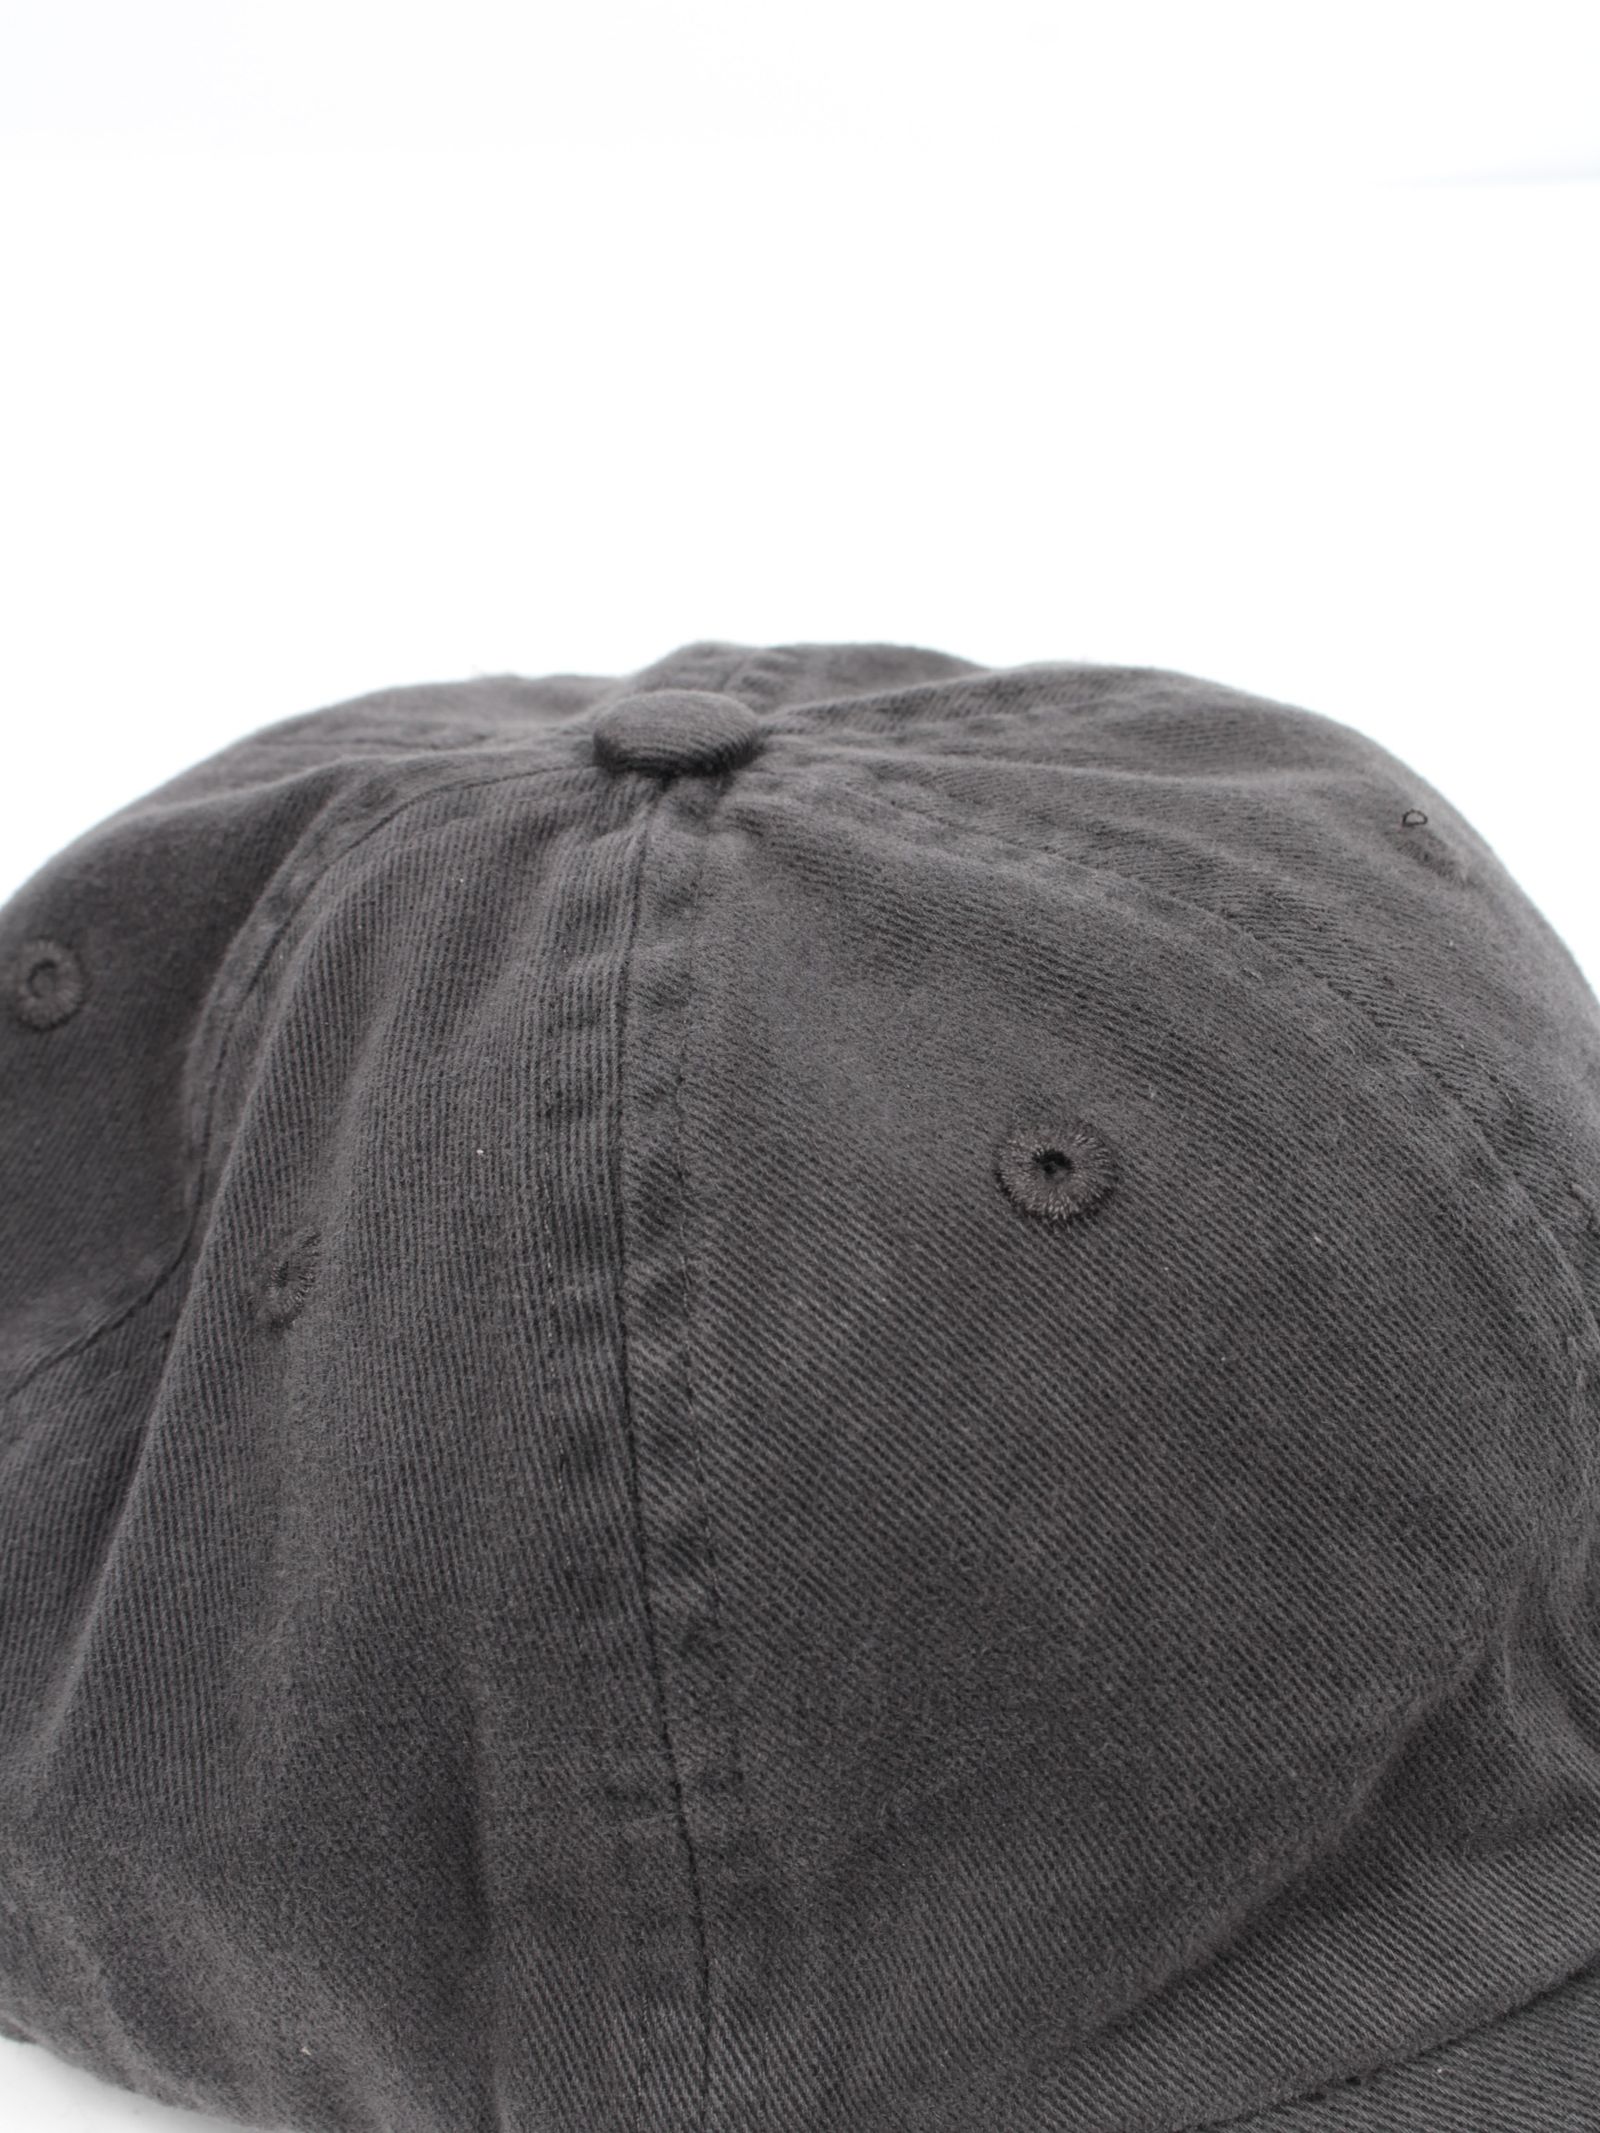 entire studios - 【24SS】コットン キャップ / STANDARD CAP / WASHED ...